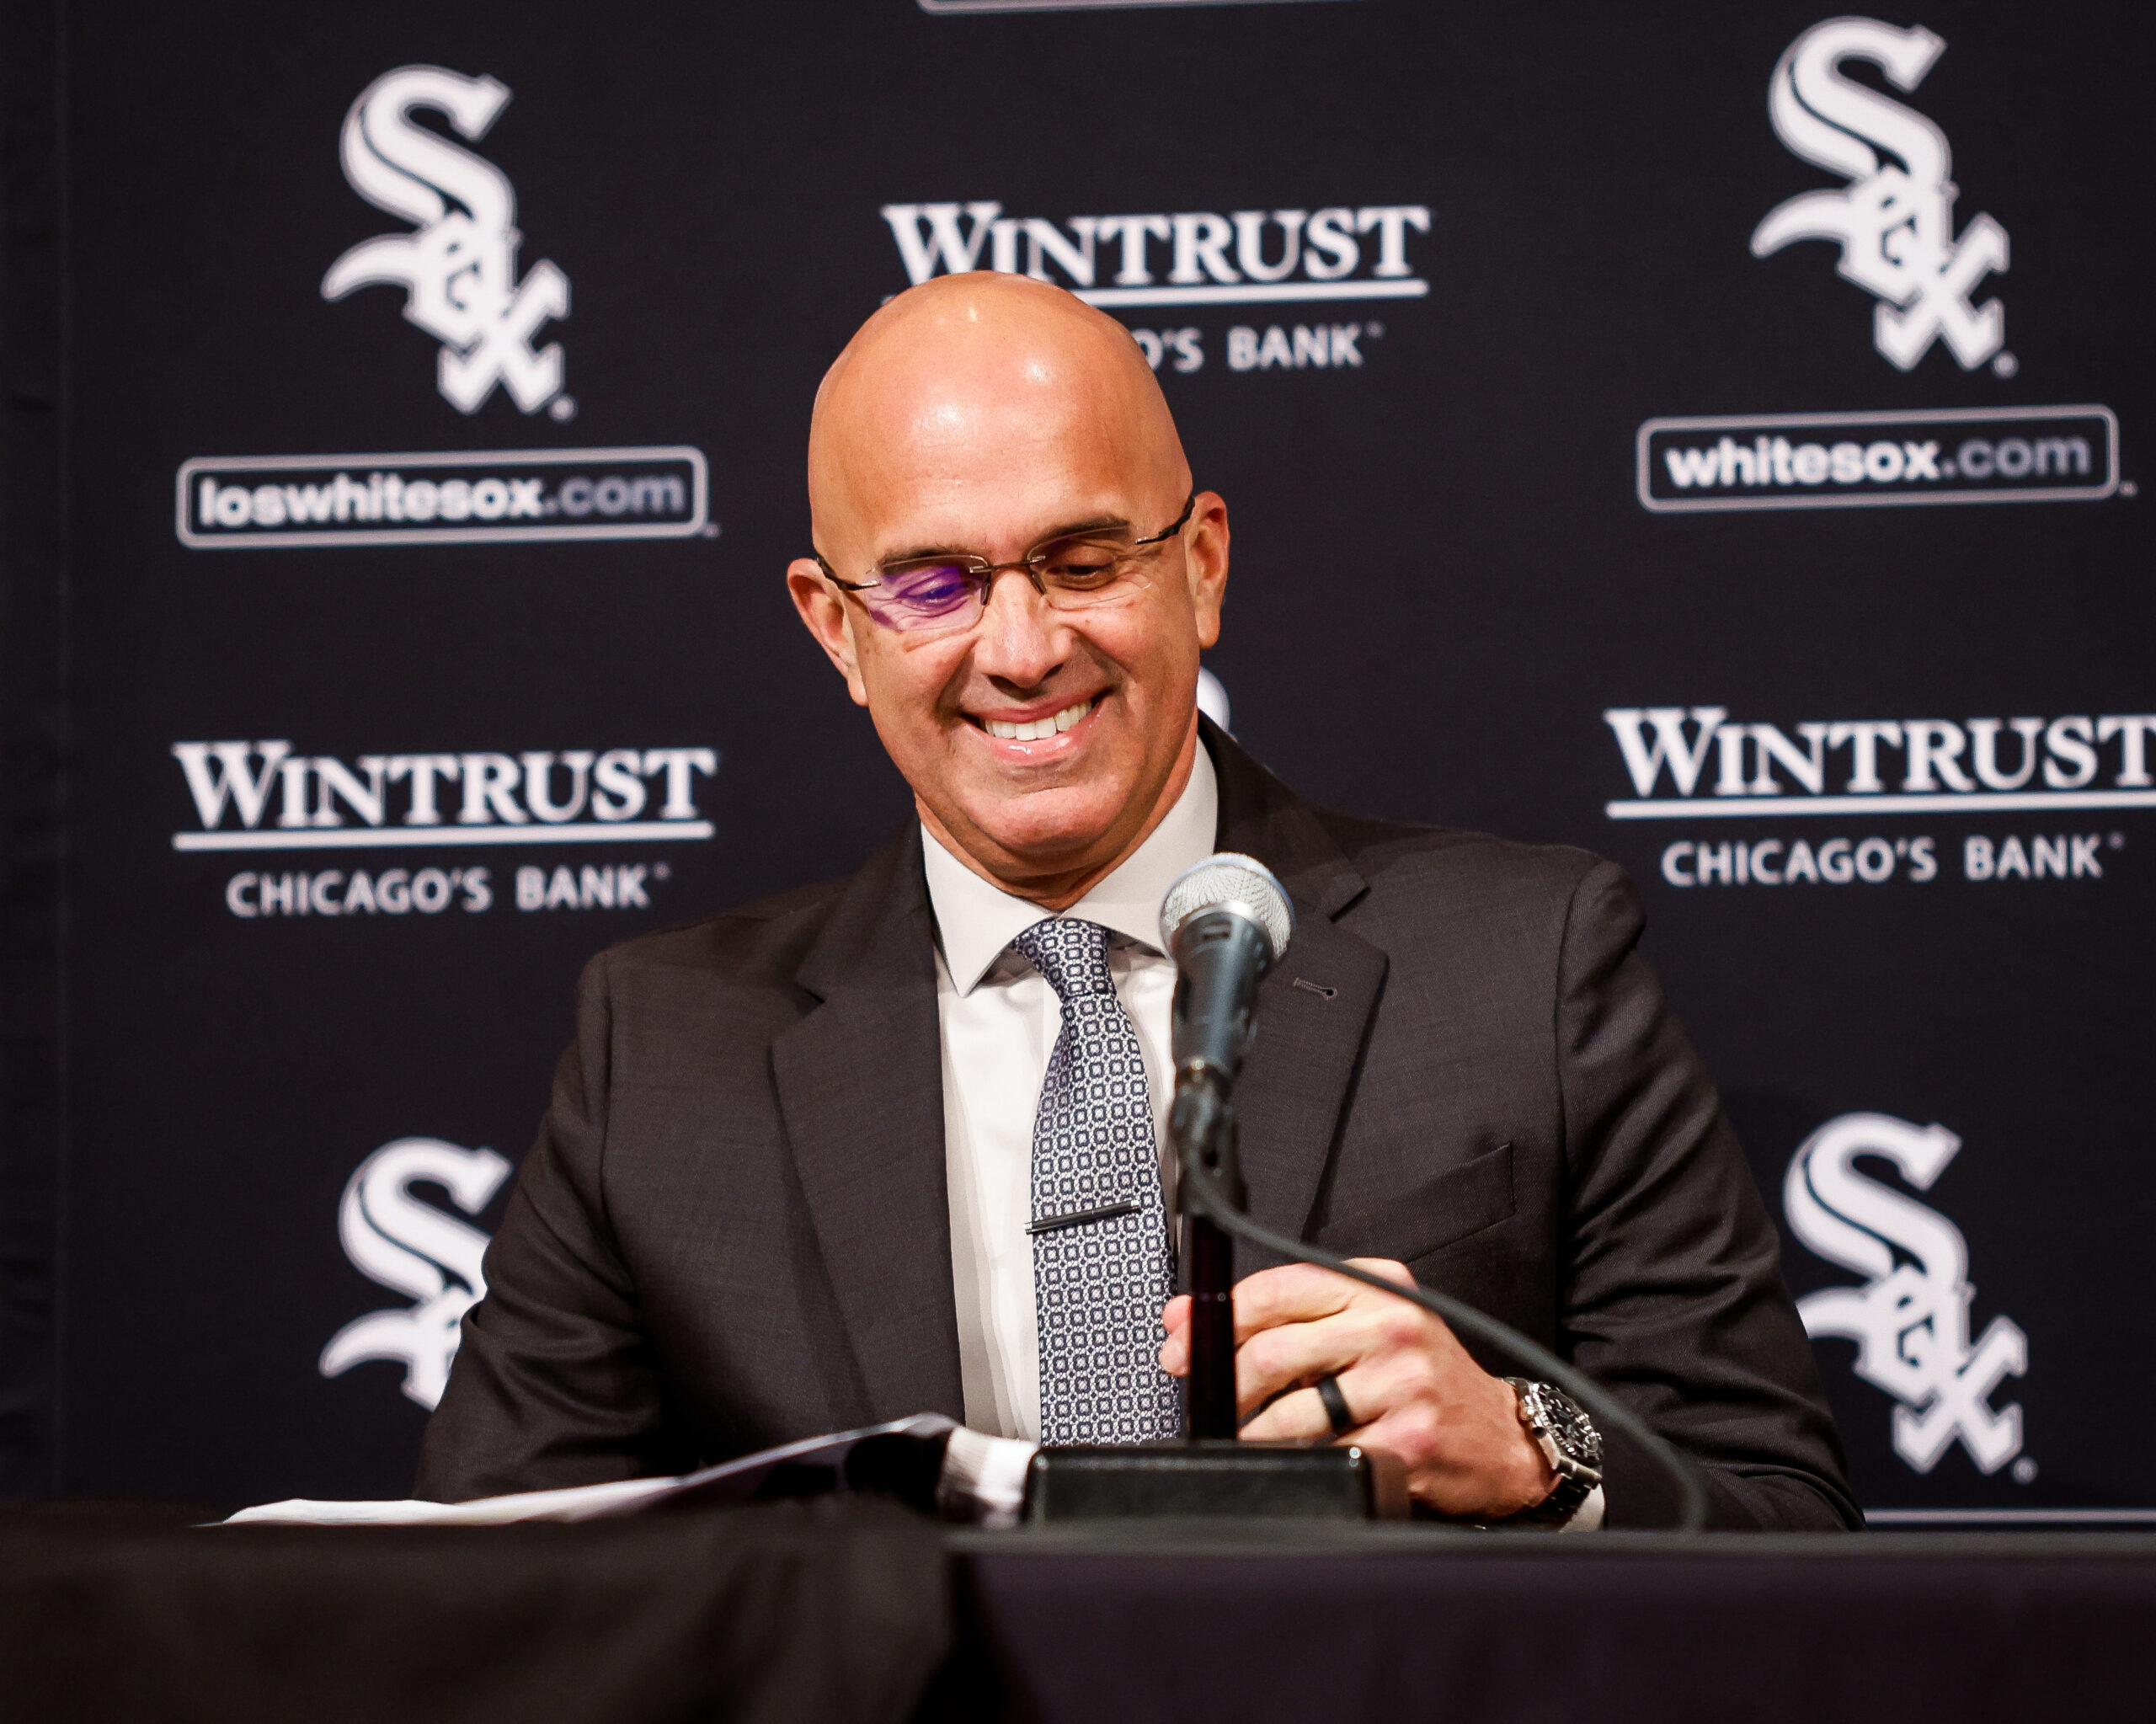 Taking the Road Less Traveled: New White Sox Manager Reflects on Journey to  Head Coaching Position - Excelsior University